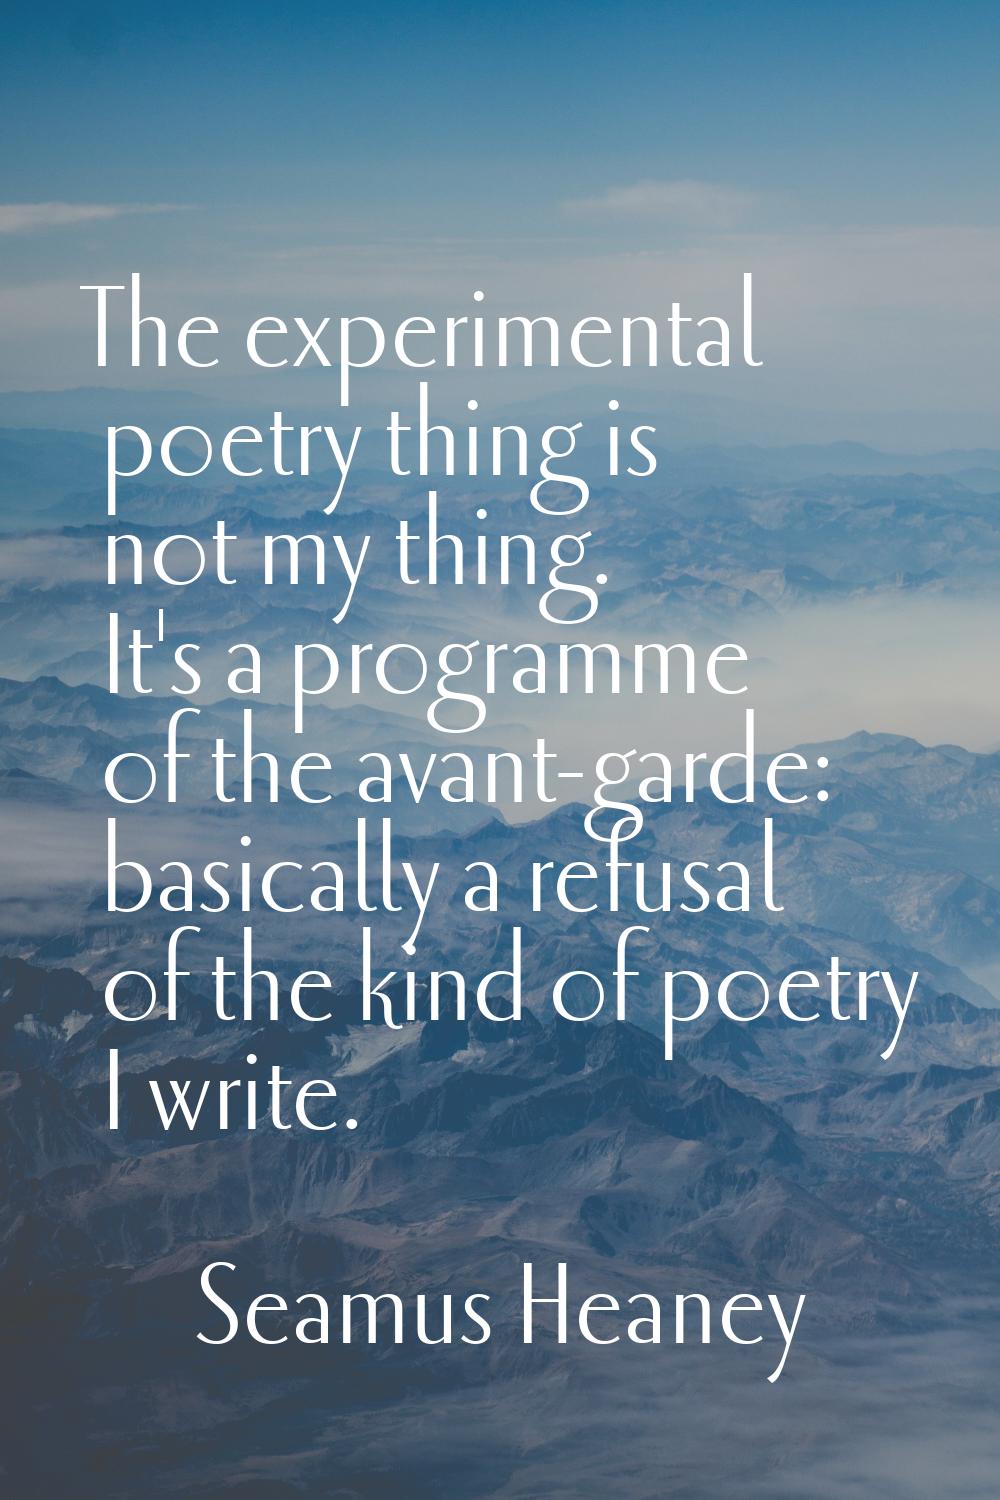 The experimental poetry thing is not my thing. It's a programme of the avant-garde: basically a ref